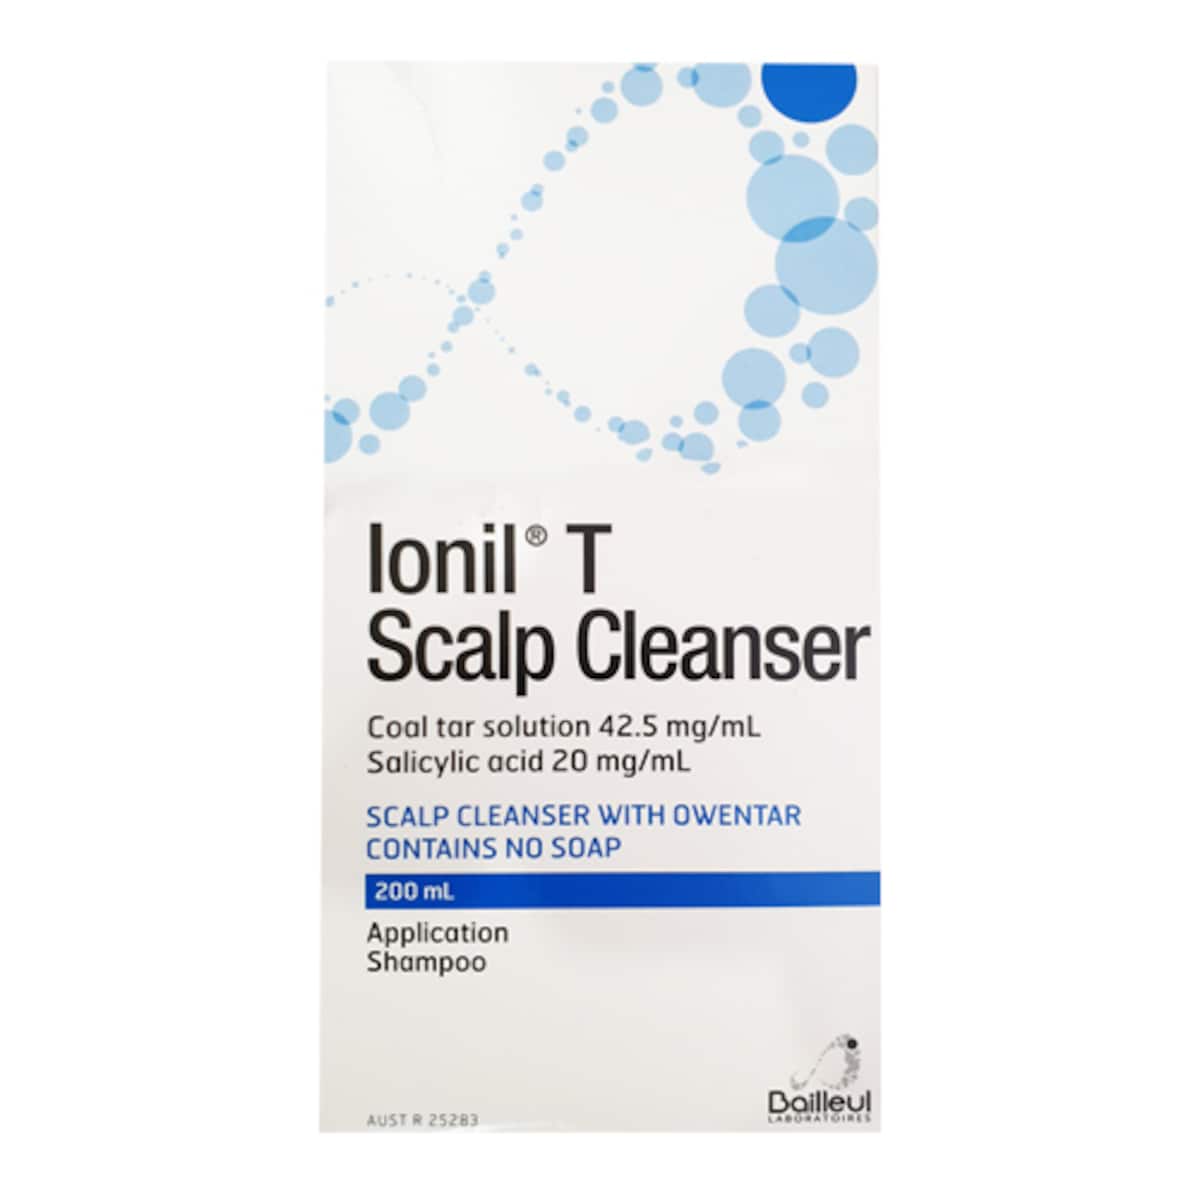 Ionil T Scalp Cleanser with Owentar 200ml